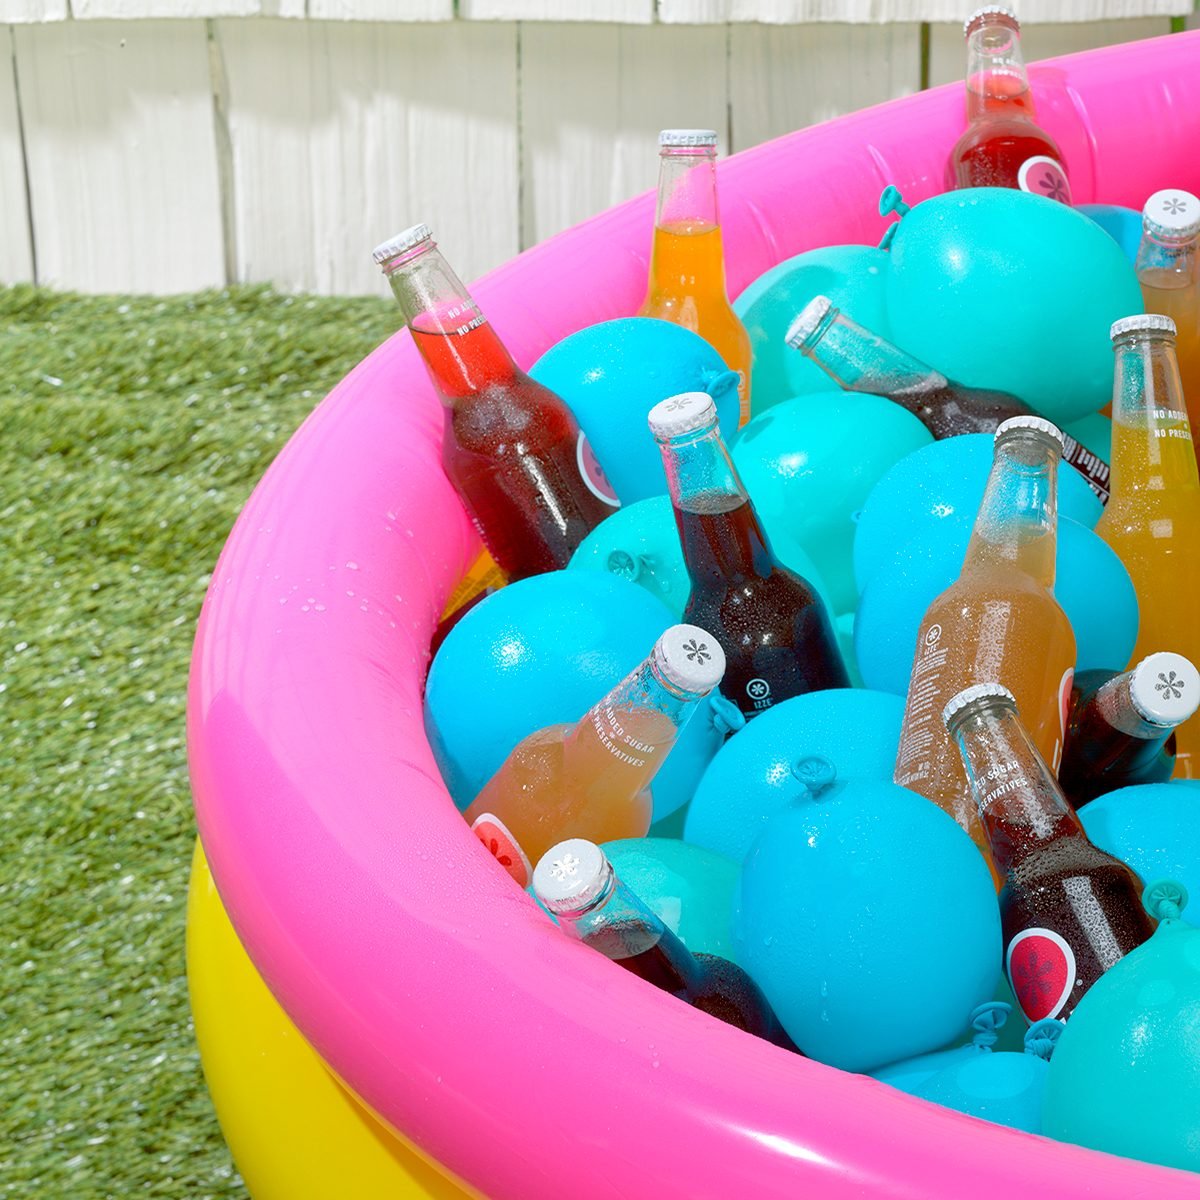 Drink dispensers: A refreshing idea for summer parties